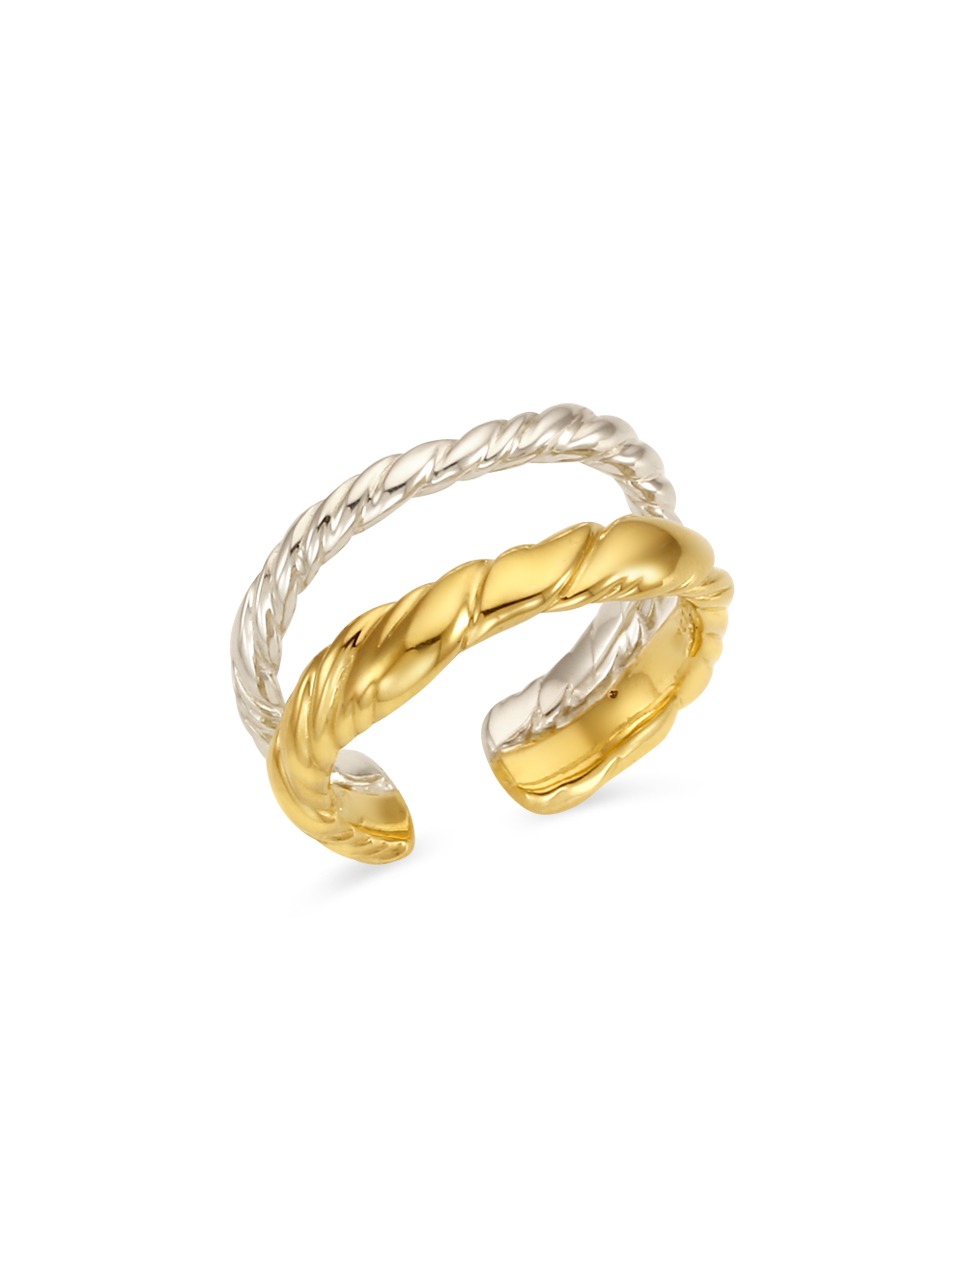 Swirling Double Line Ring